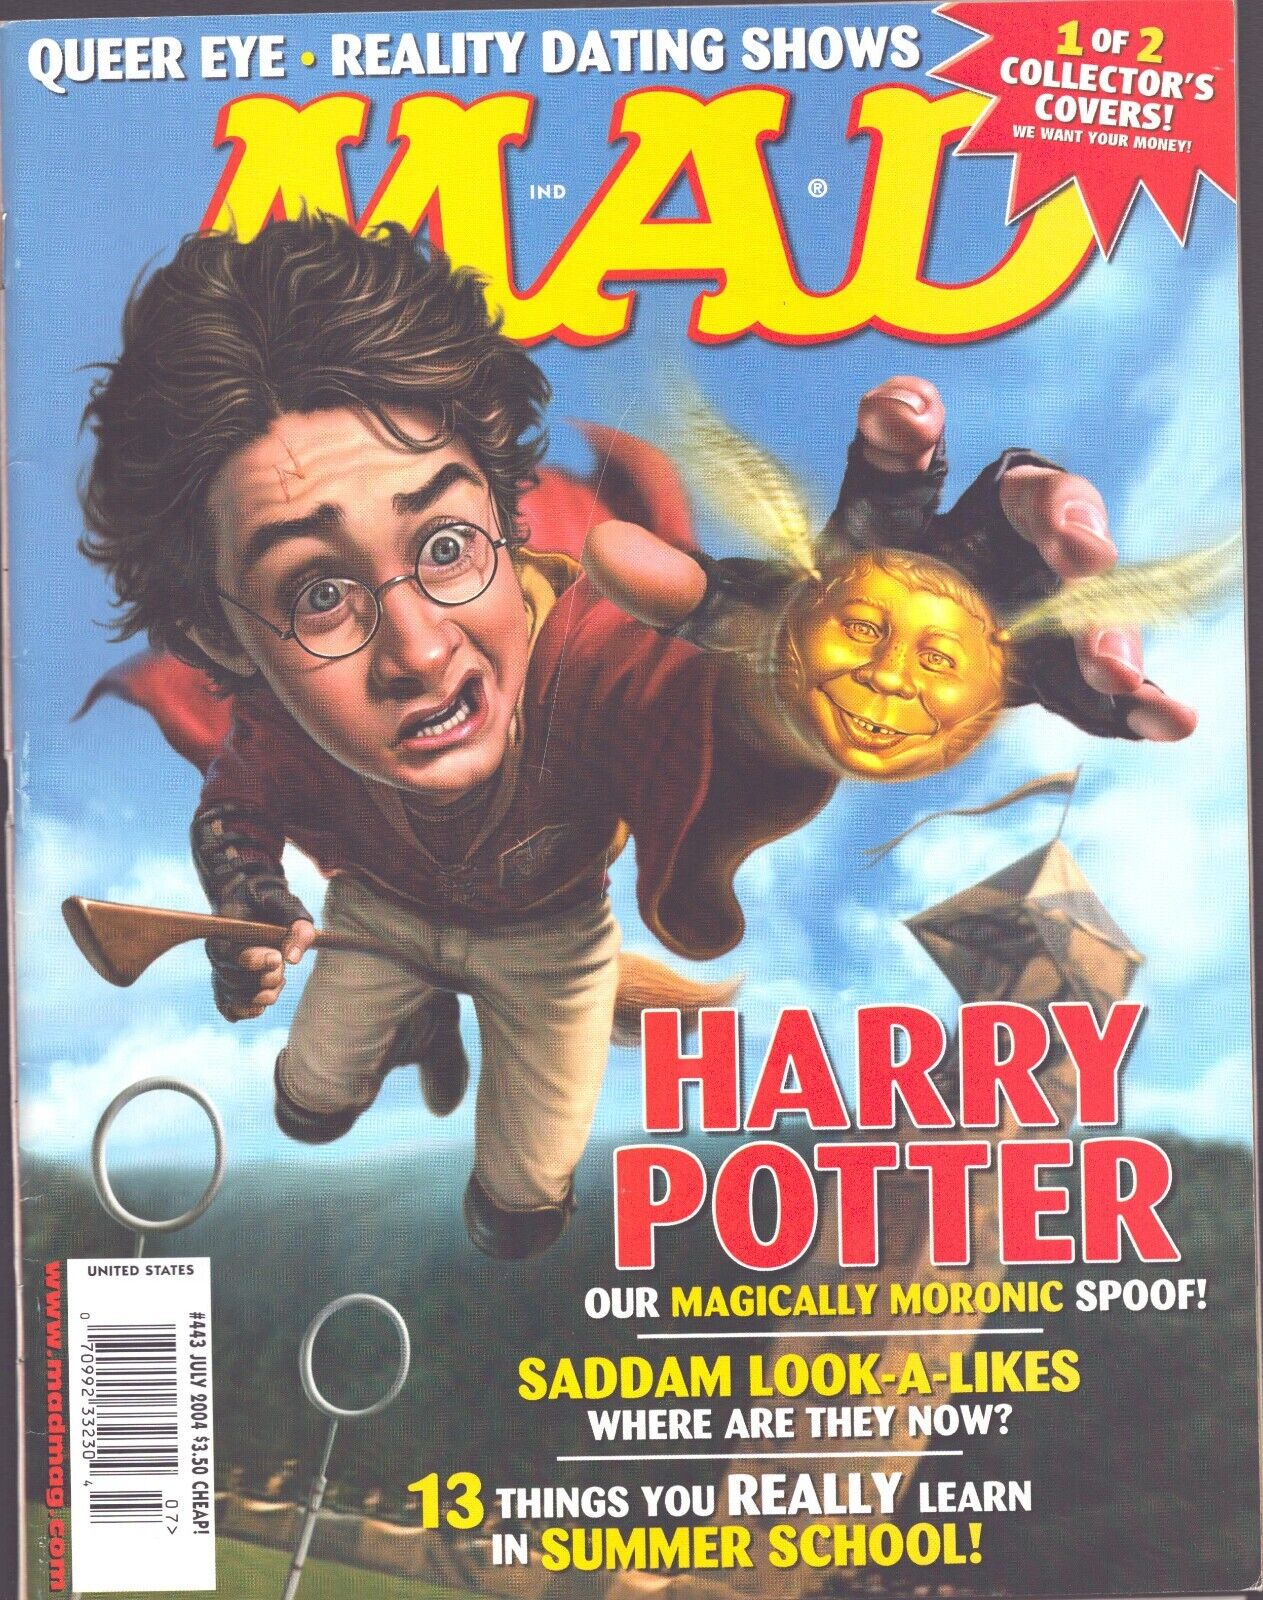 MAD MAGAZINE USA No. 443 JULY 2004 - HARRY POTTER, QUEER EYE, DATING SHOWS